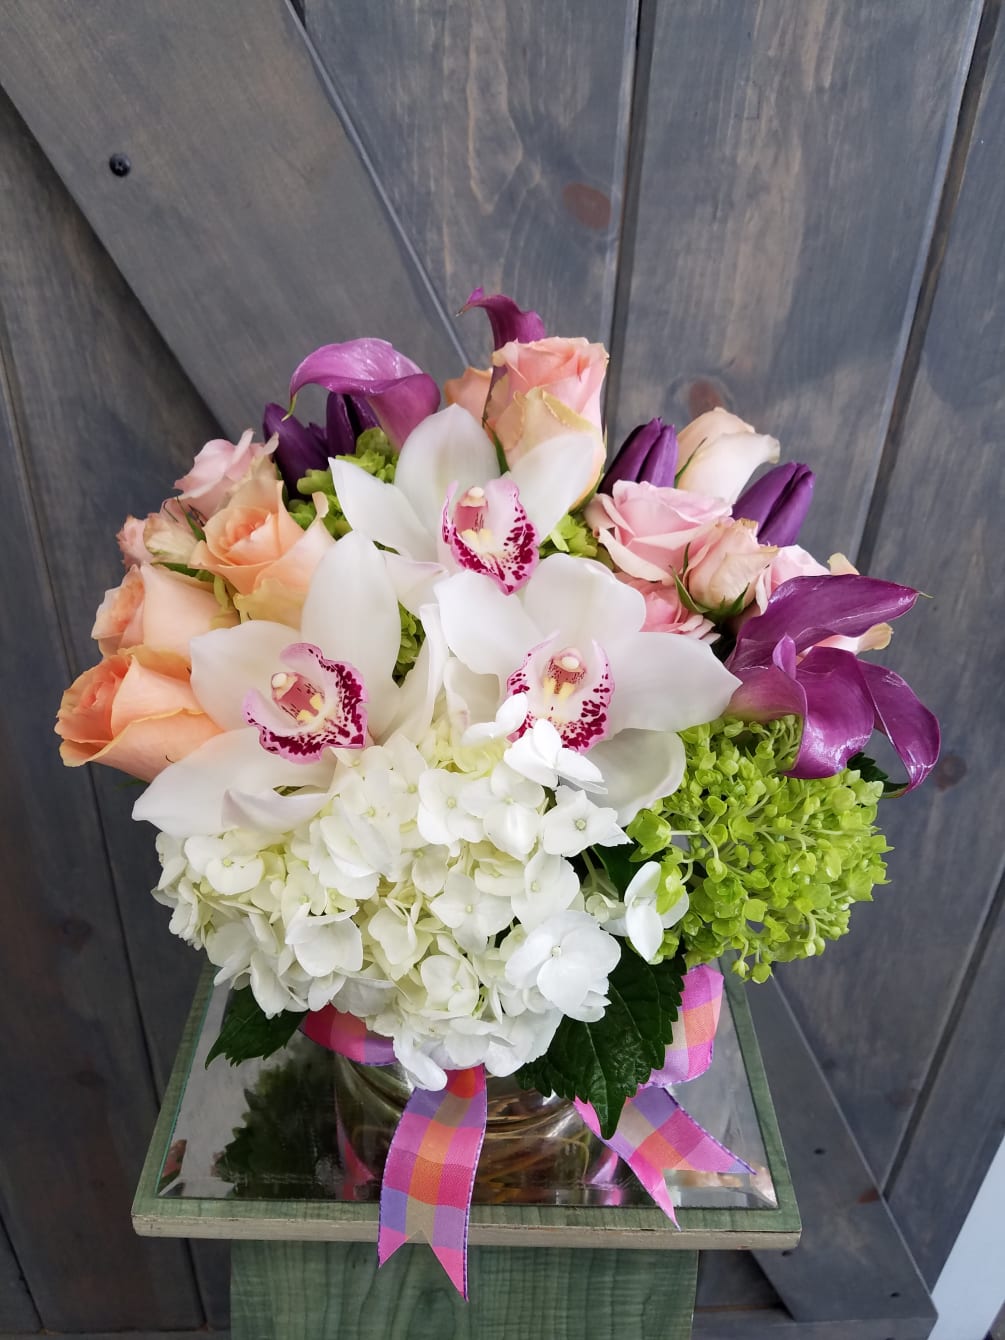 This enchantingly beautiful arrangement is designed with a 6in. Cylinder clear glass